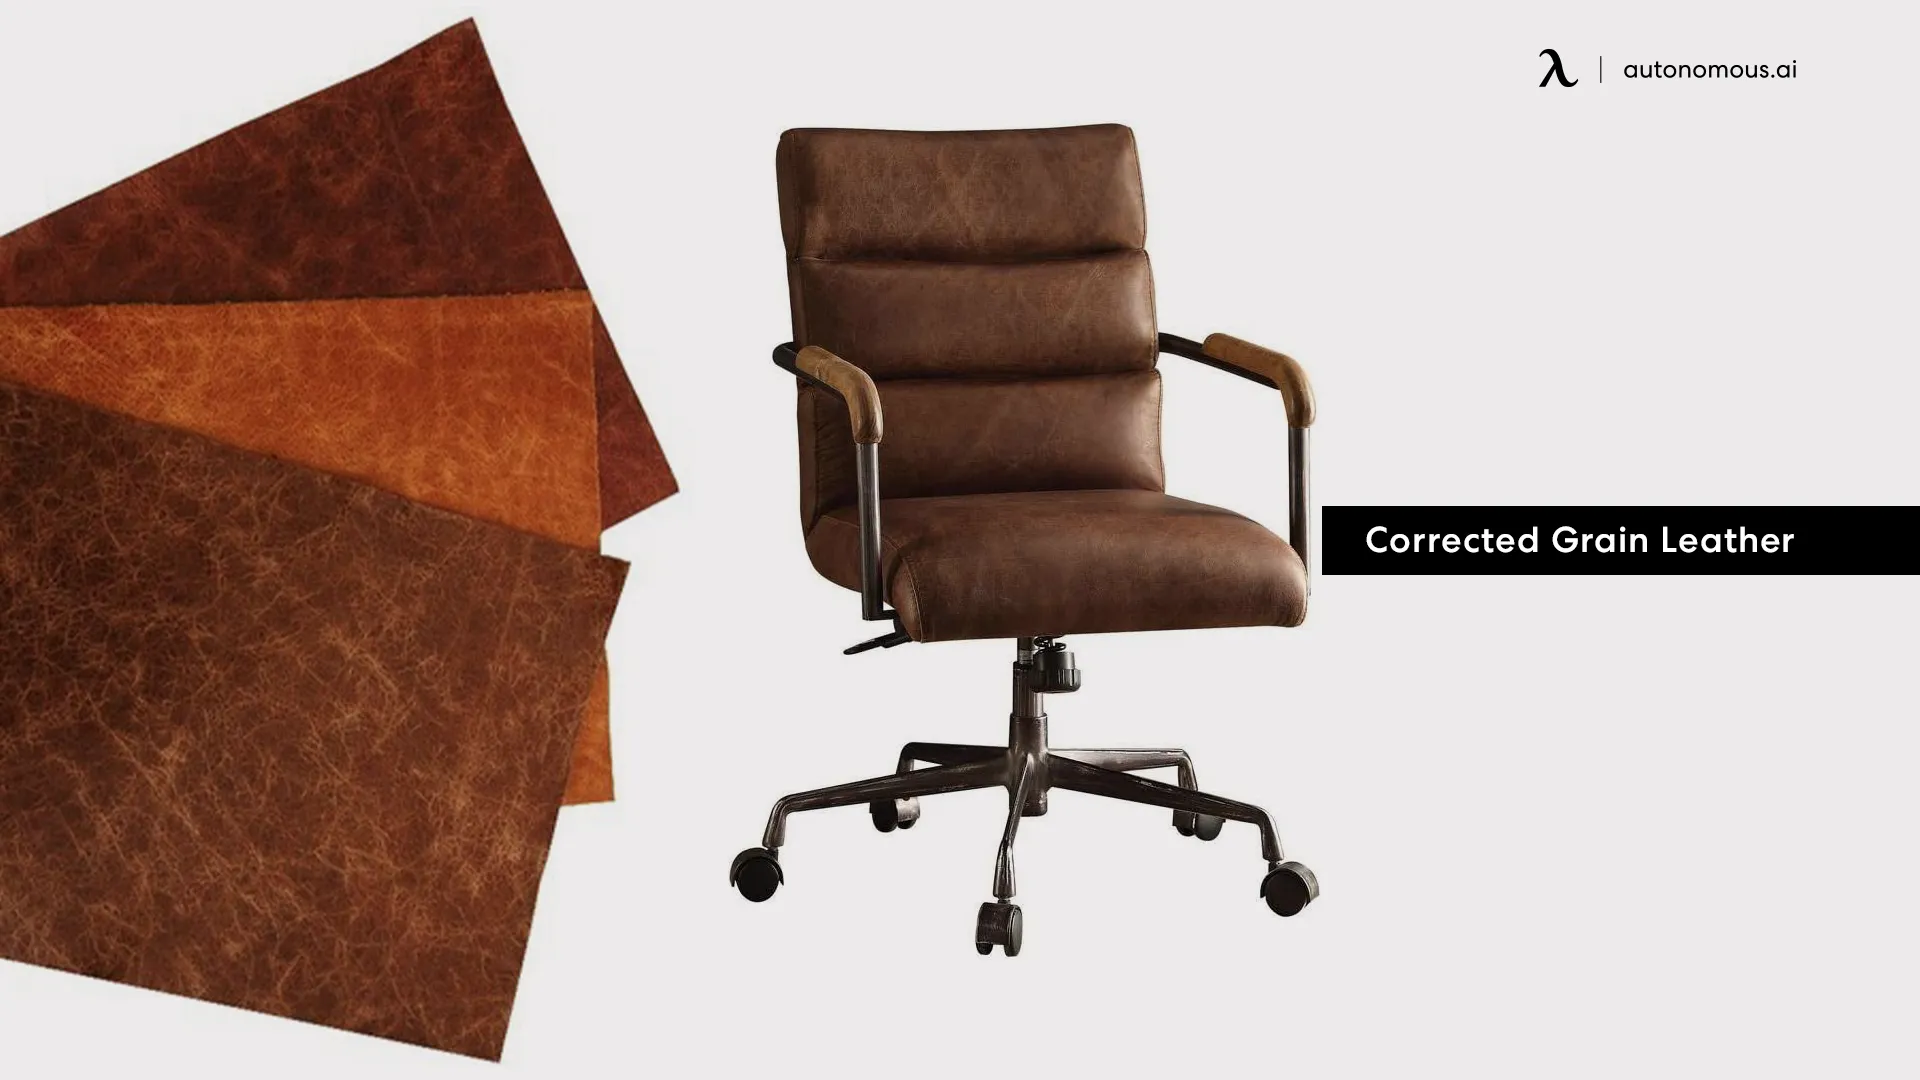 Corrected Grain - different types of leather